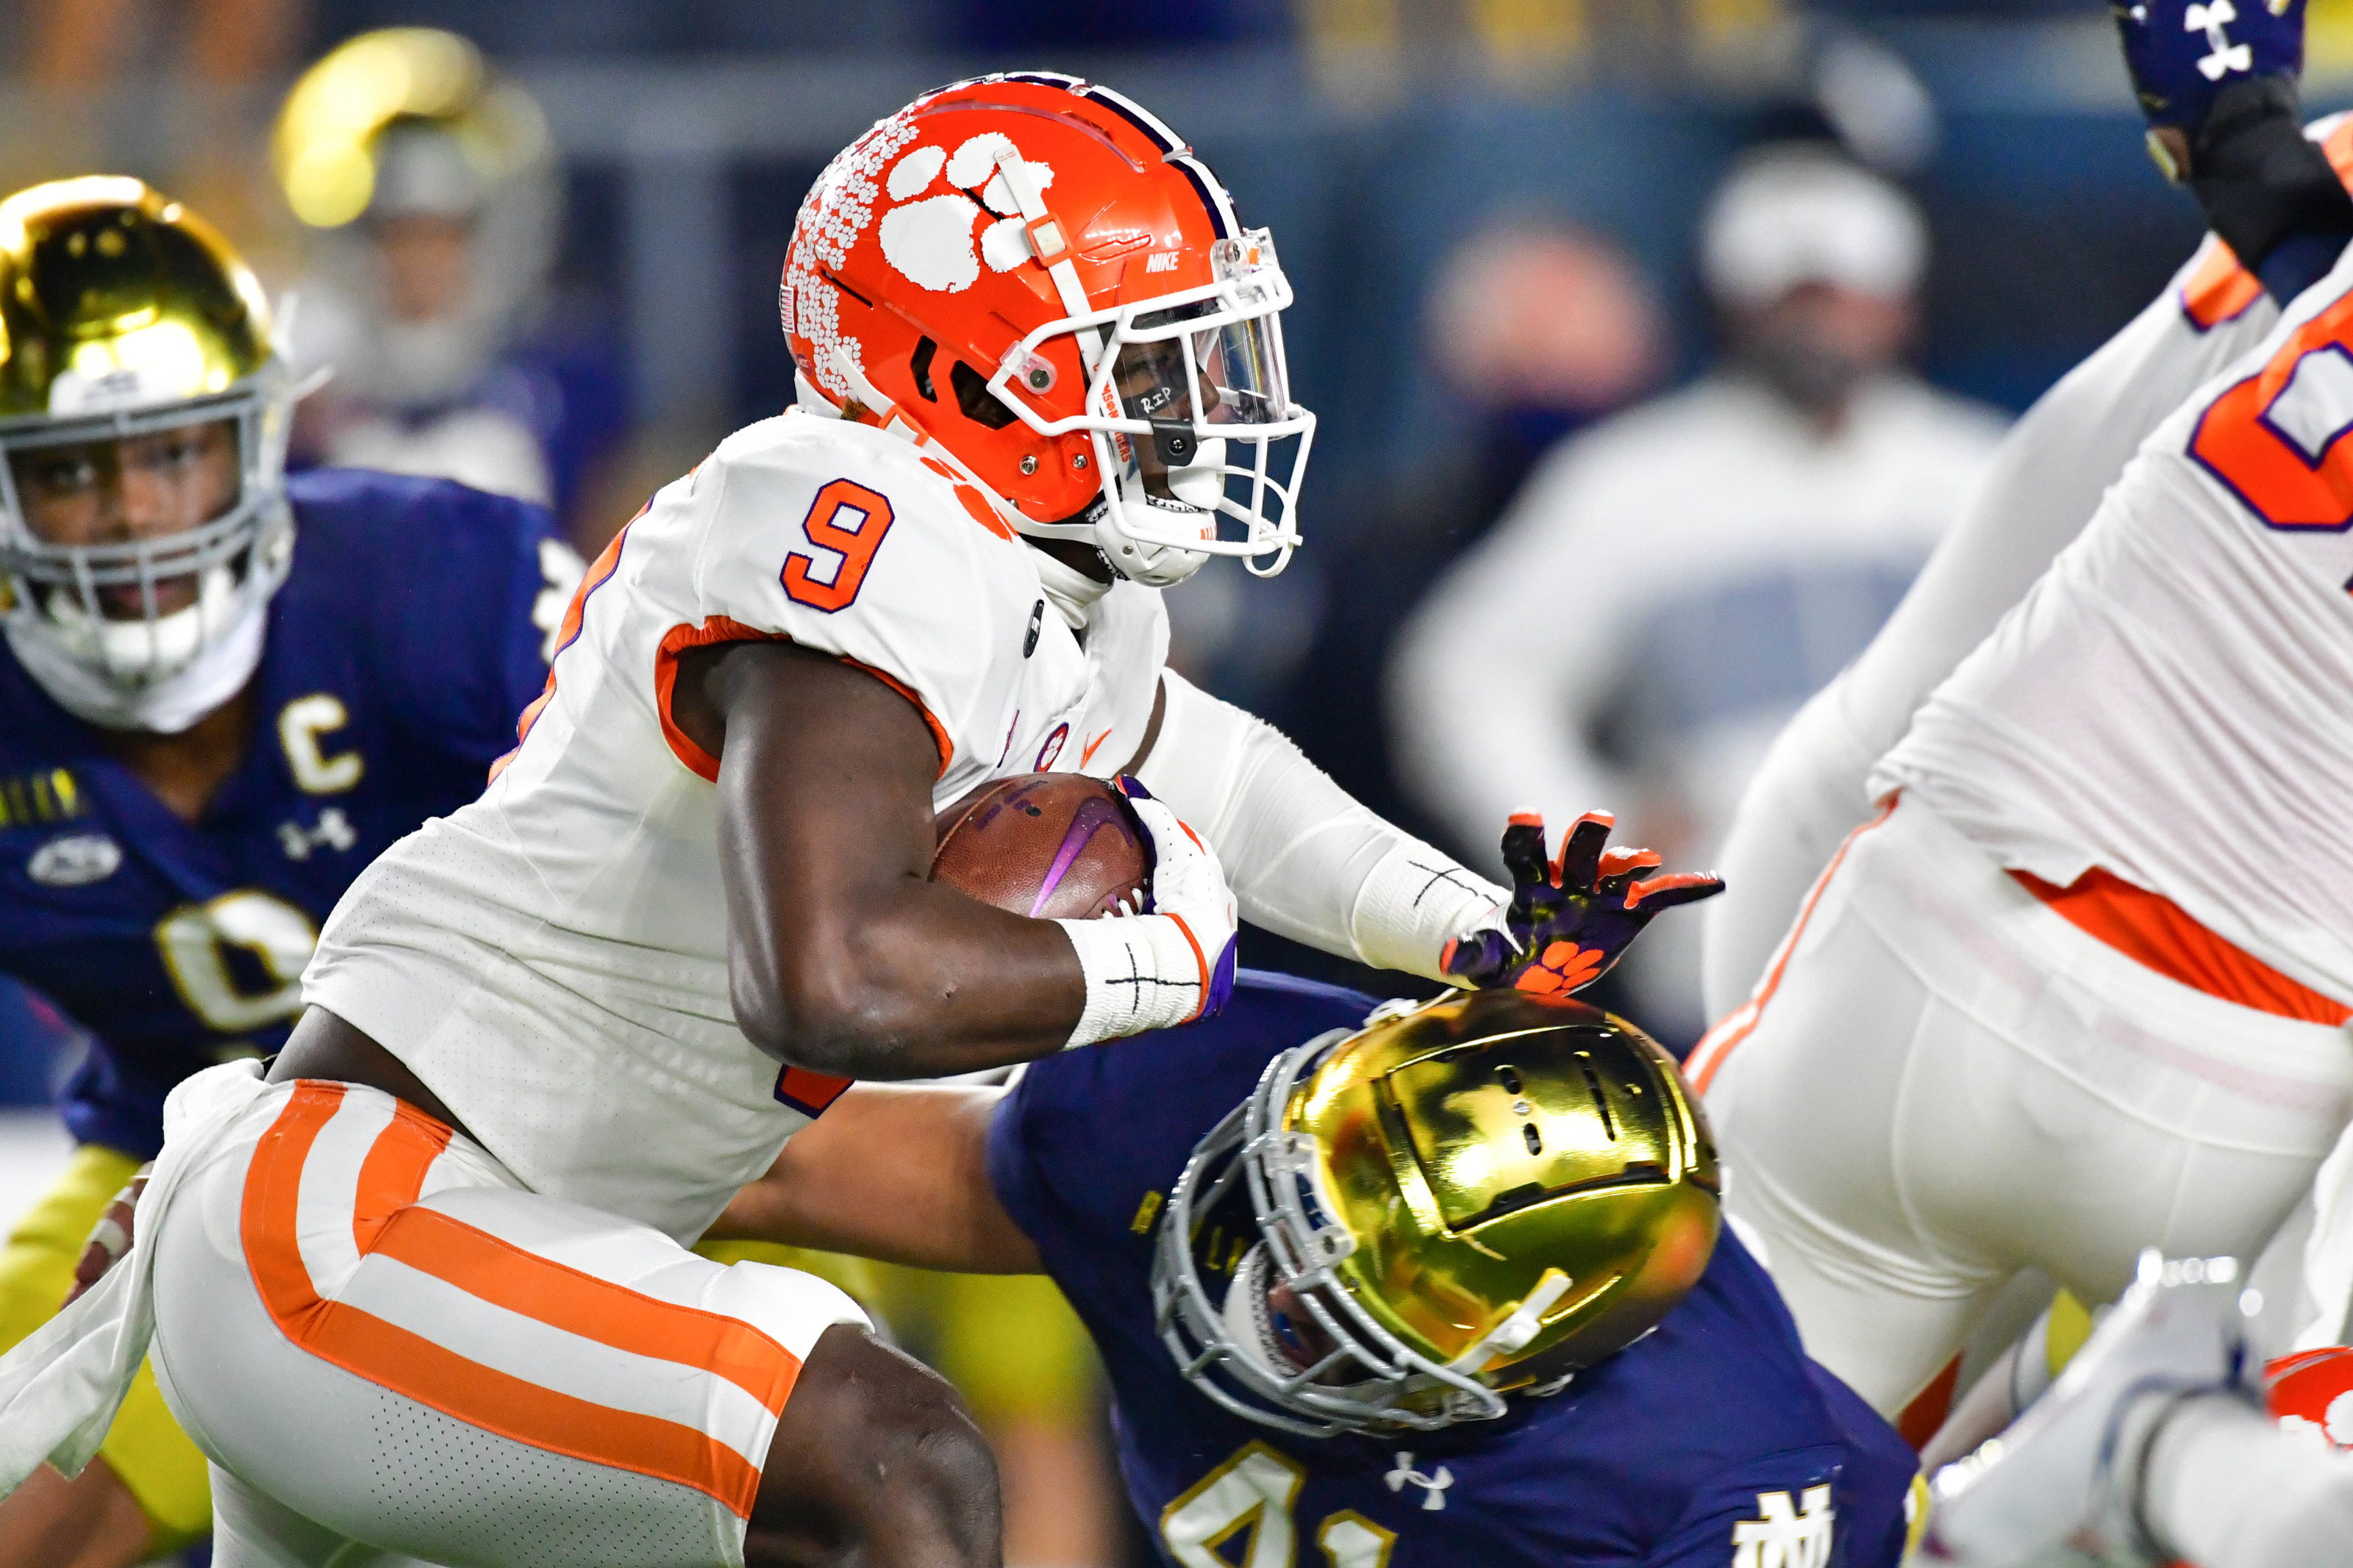 Ranking the top five running backs in the 2021 NFL Draft class